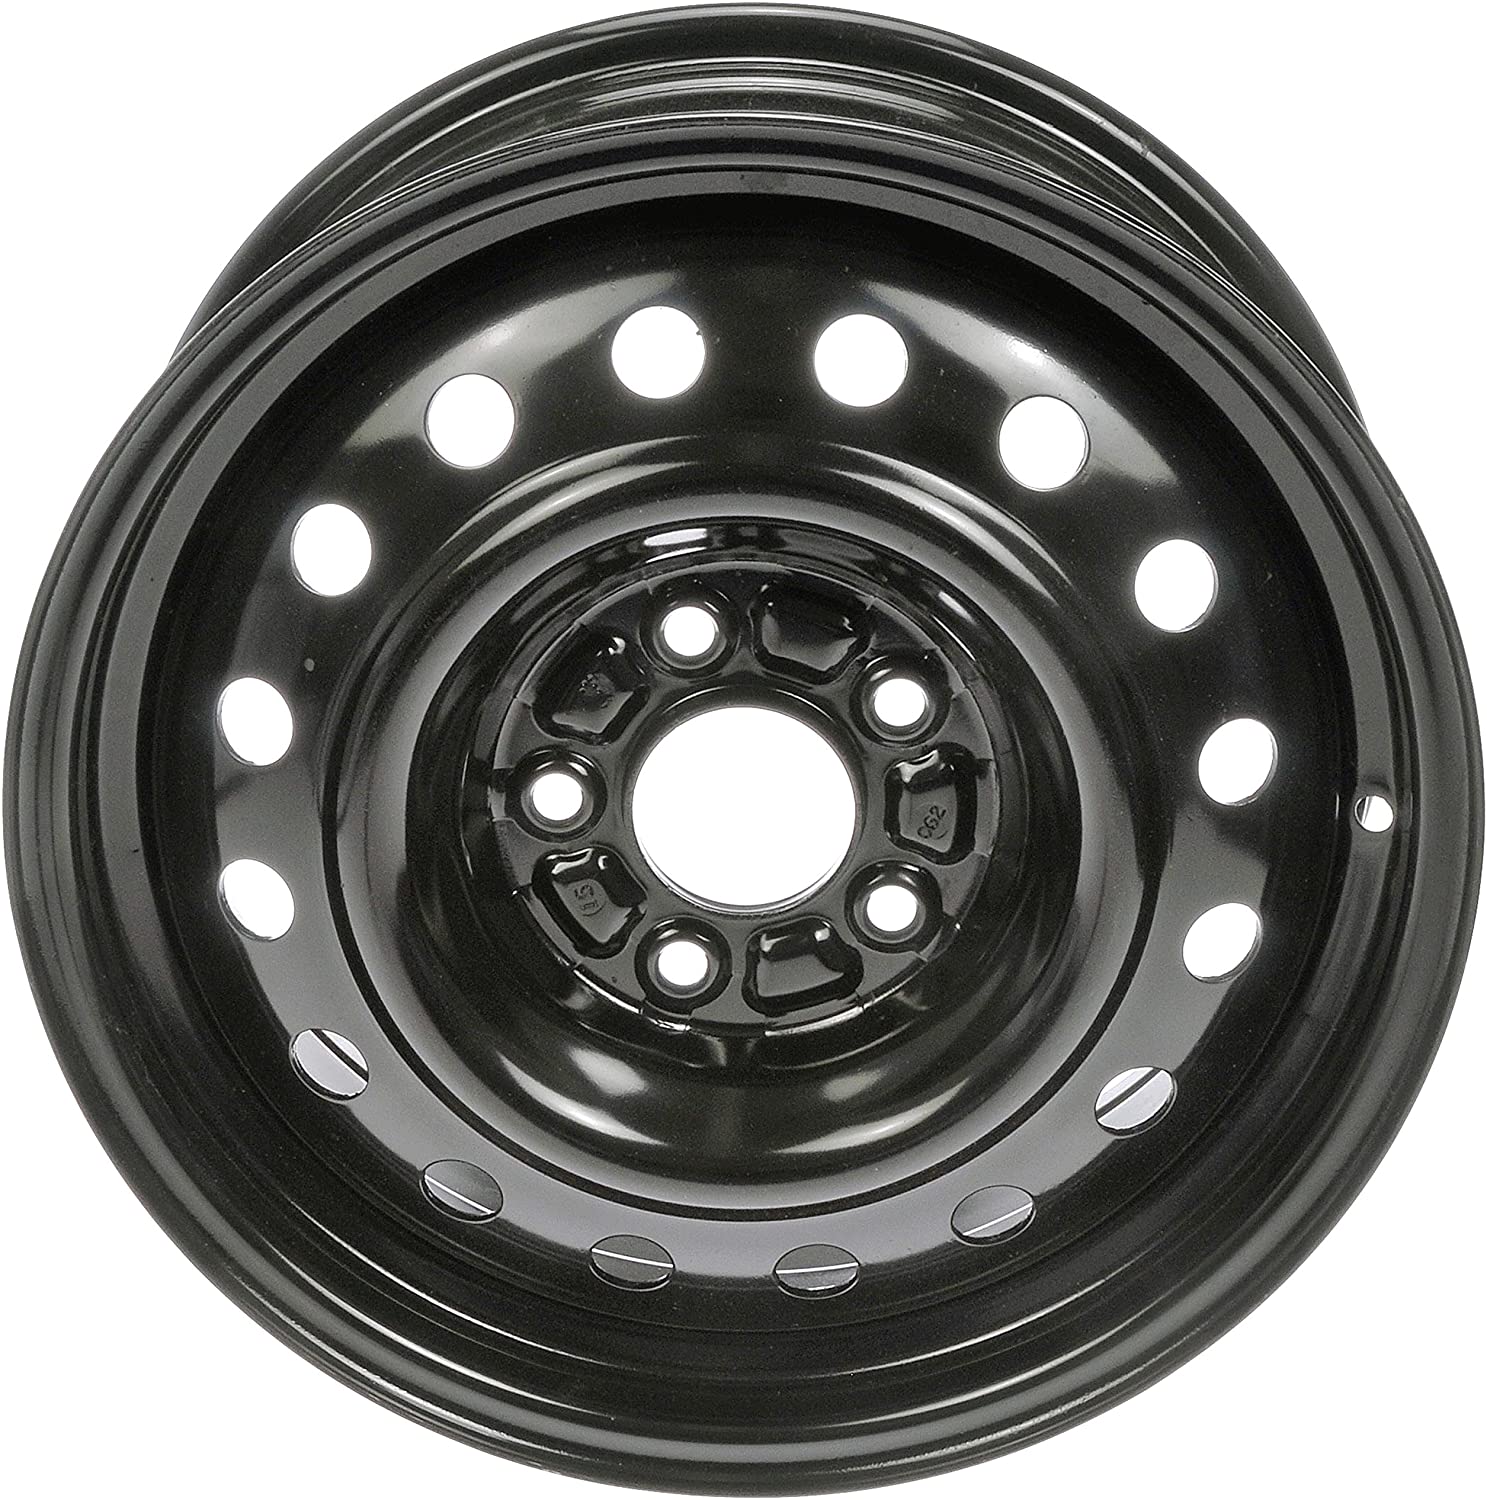 Dorman 939-197 Black Wheel with Painted Finish (16 x 6.5 inches /5 x 114 mm, 52 mm Offset)